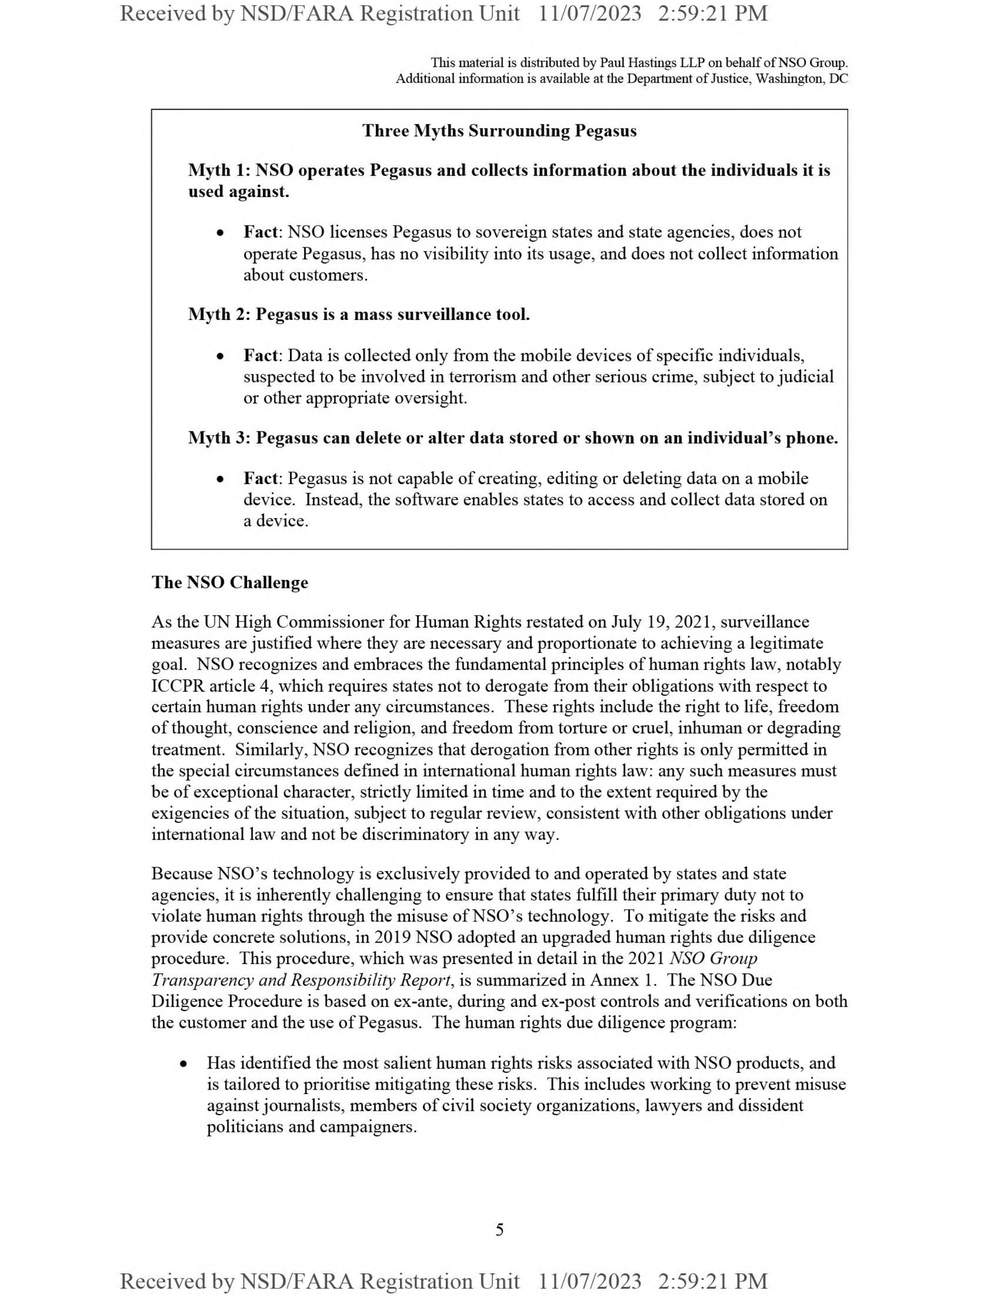 Page 12 from NSO Lobbyists’ “Urgent” Request for Meeting With Antony Blinken